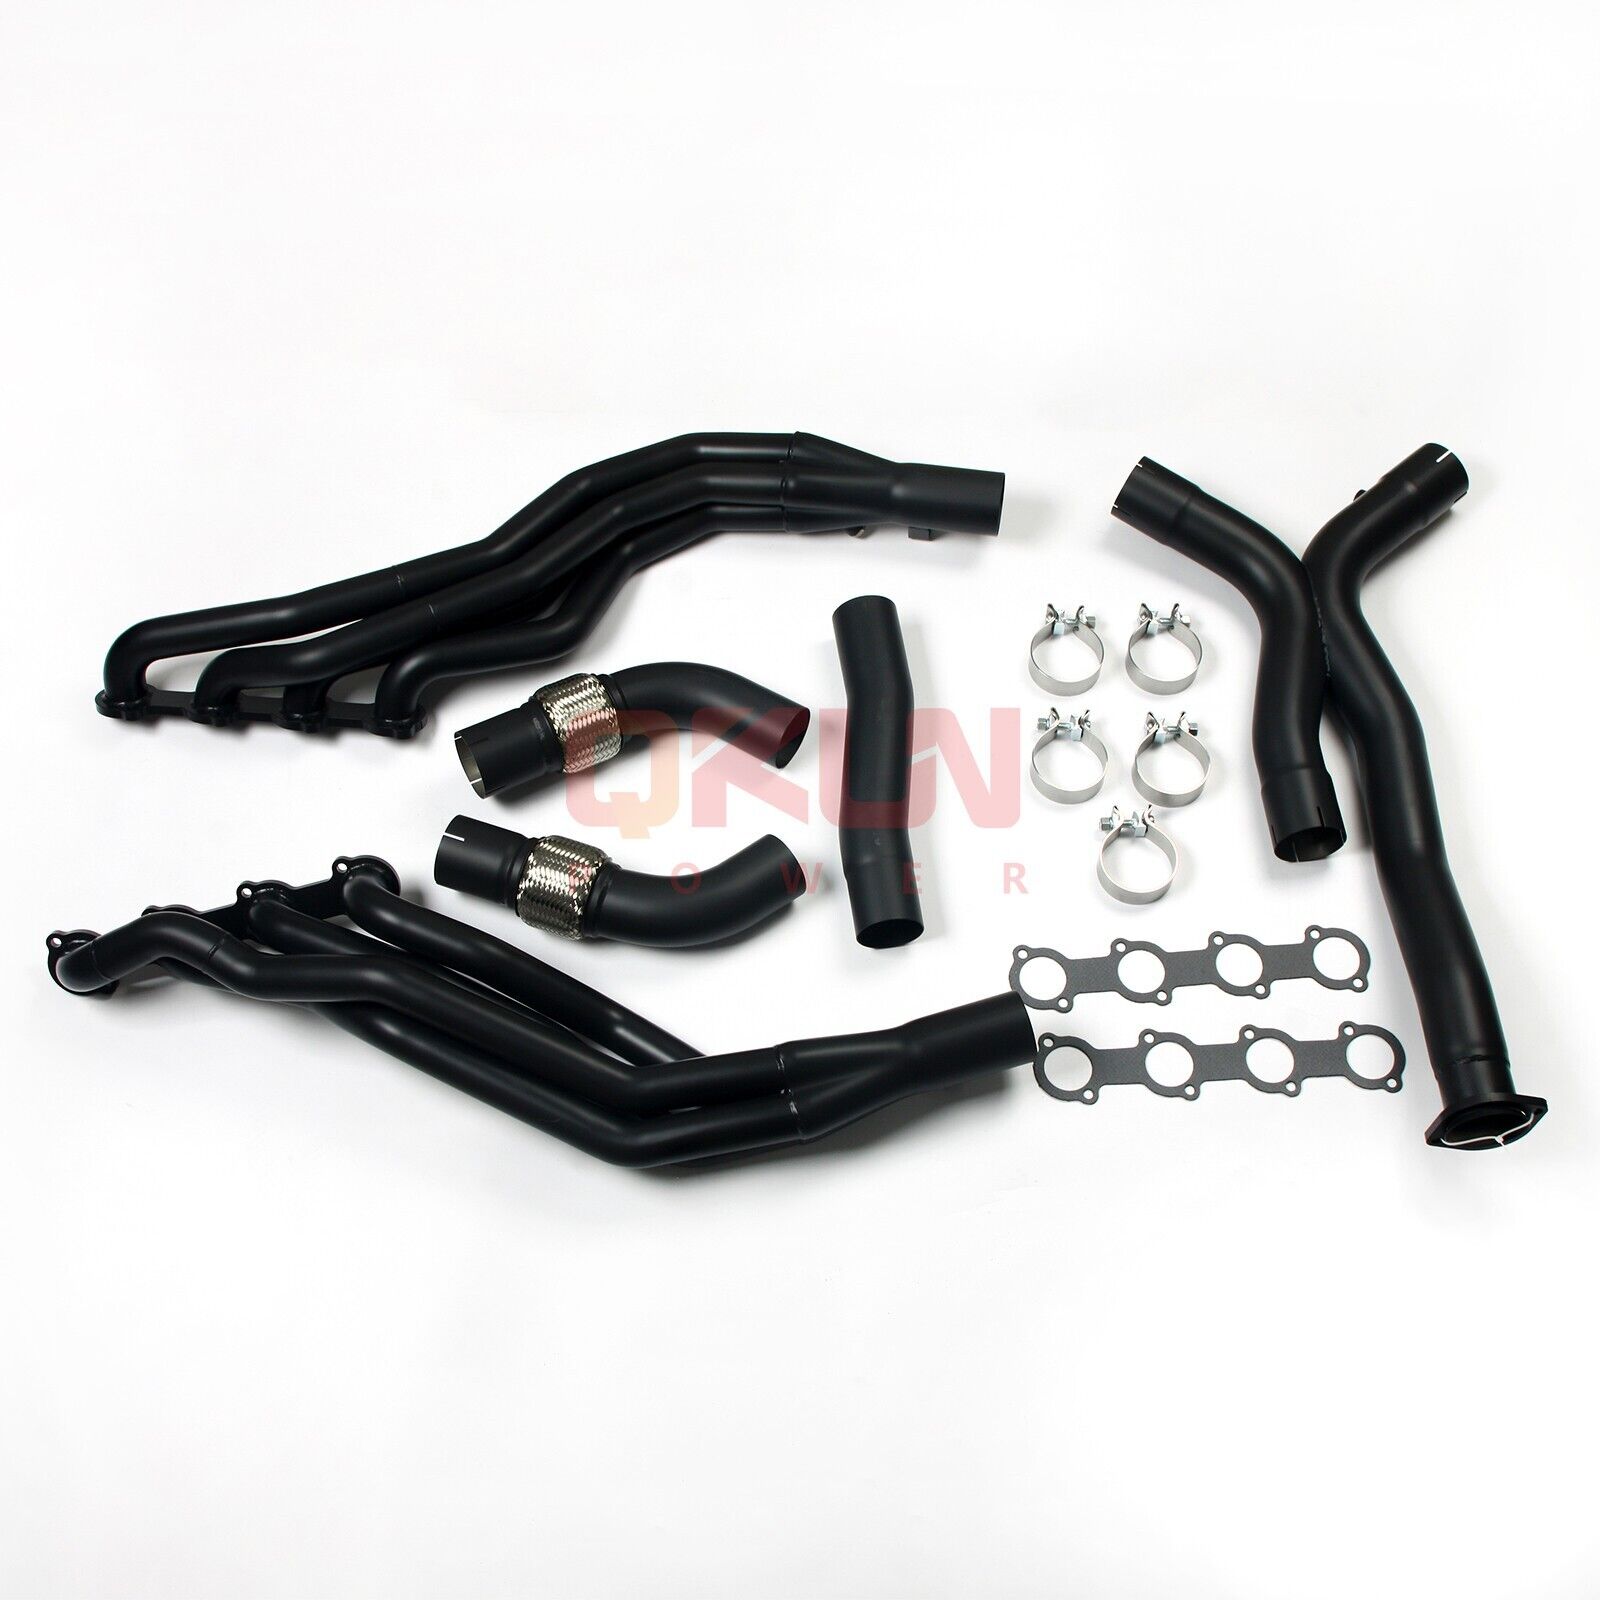 HEADER CERAMIC REPLACEMENT FOR MERCEDES AMG CLS55 CLS500 E55 E500 M113K W211